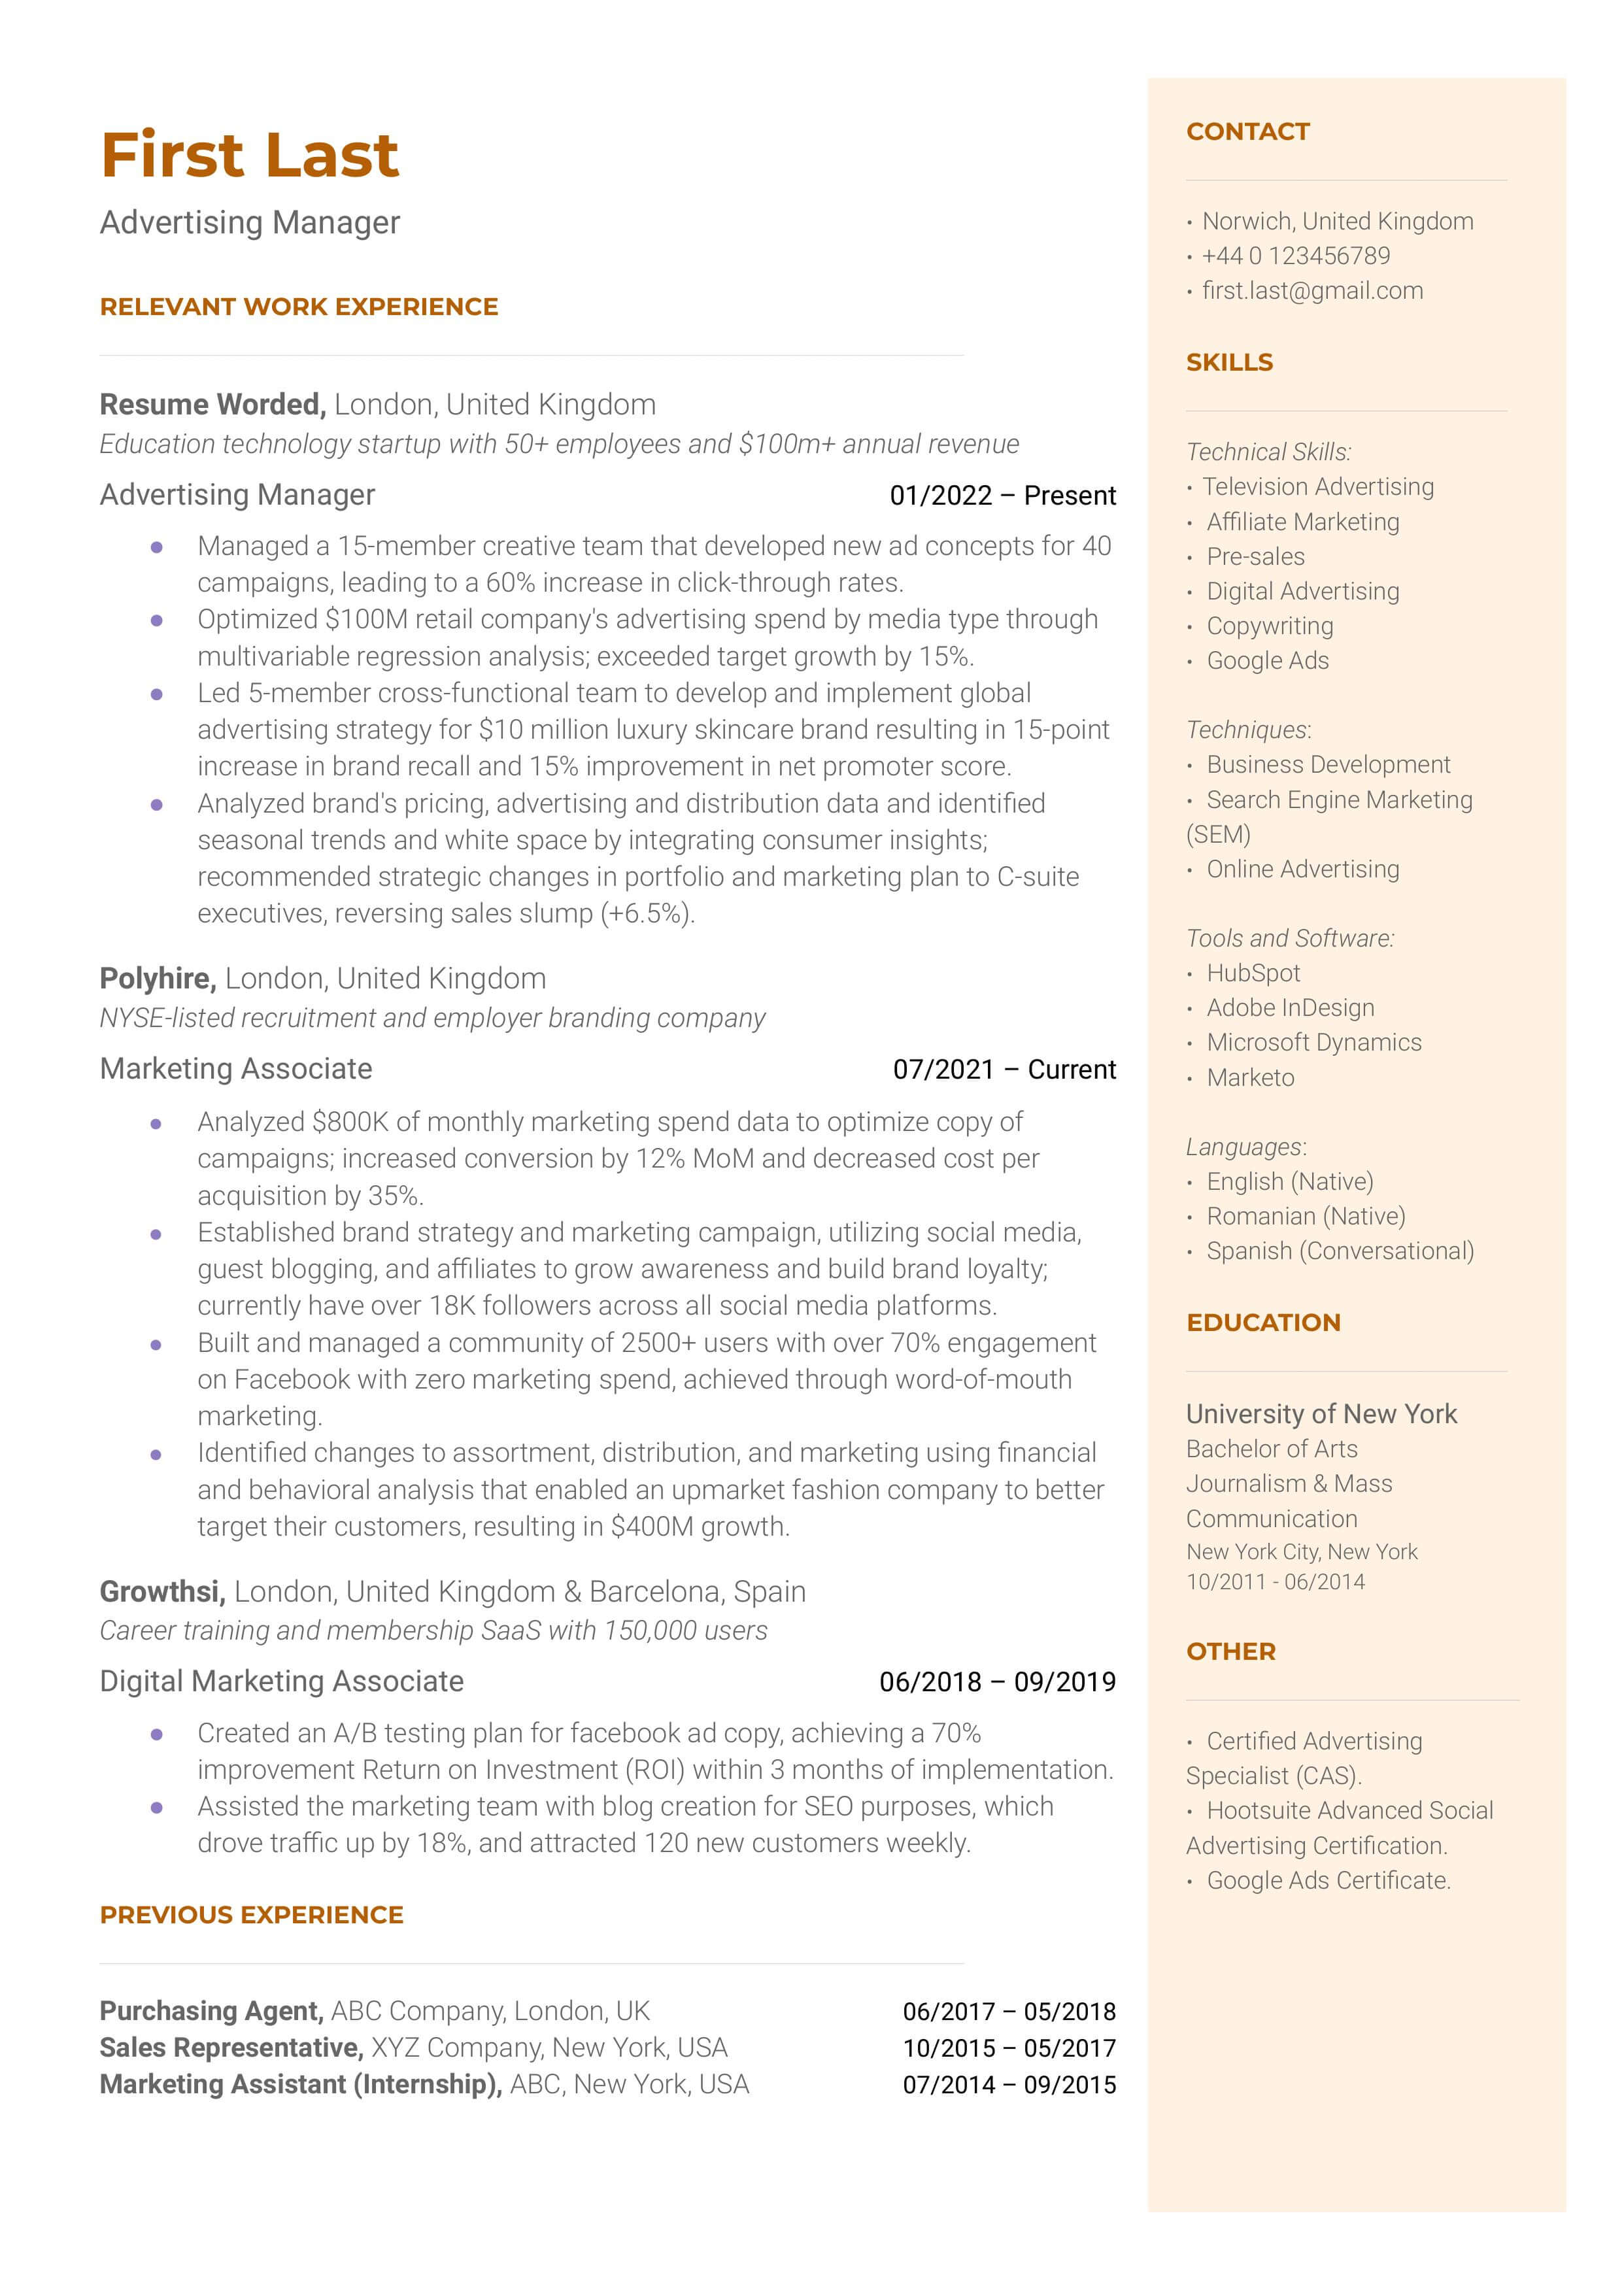 Advertising manager resume sample that highlights the applicants experience and skill set.